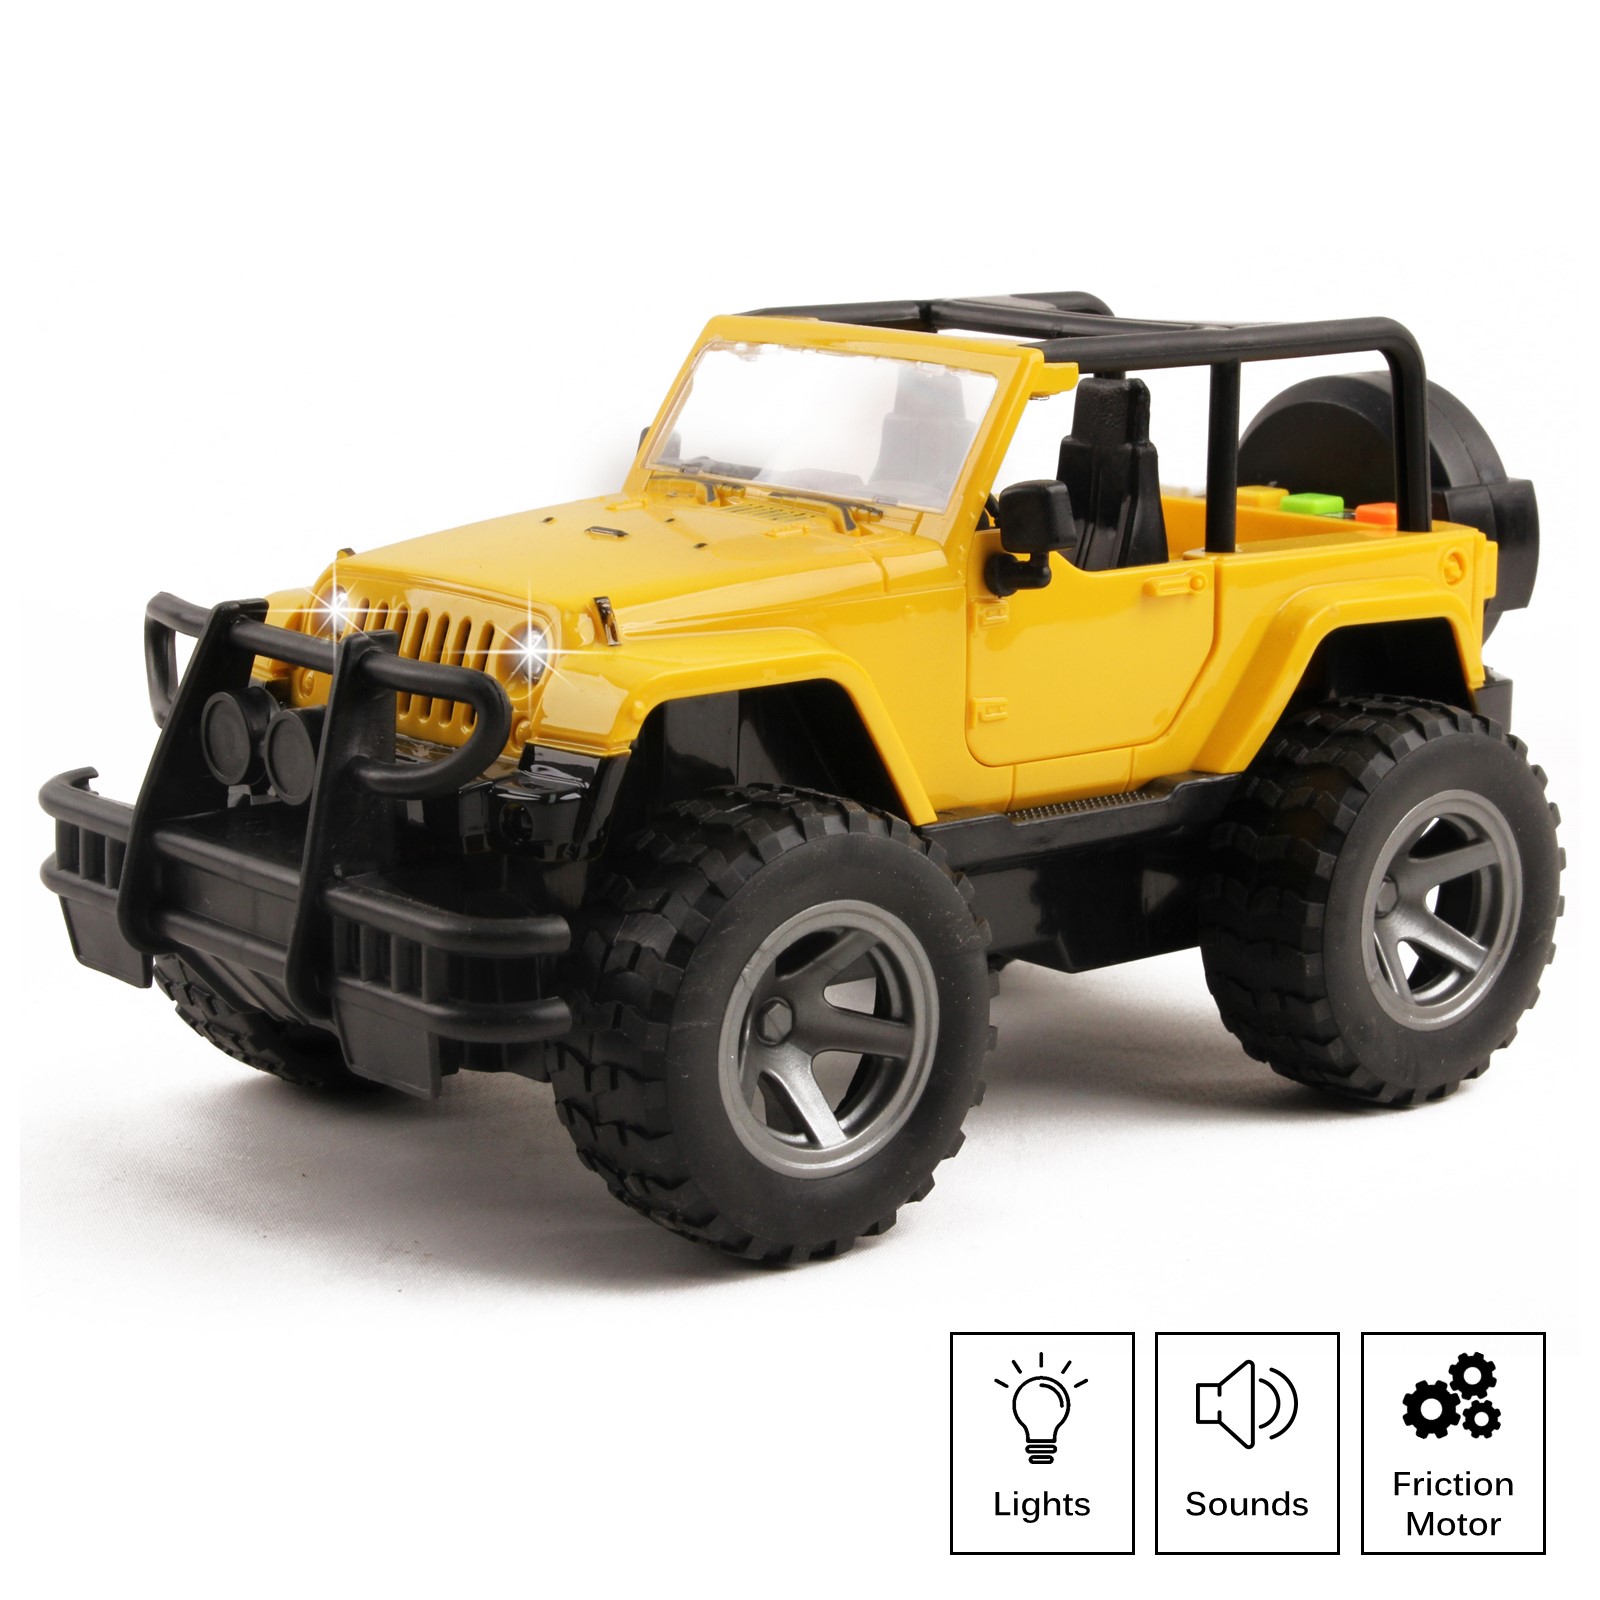 Off-Road Truck Friction Powered SUV 1:16 Scale With Lights And Sounds Doors Open Kids Push And Go Action Realistic Toy Vehicle Imagination Pretend Play Car Great Gift For Children Boys Girls